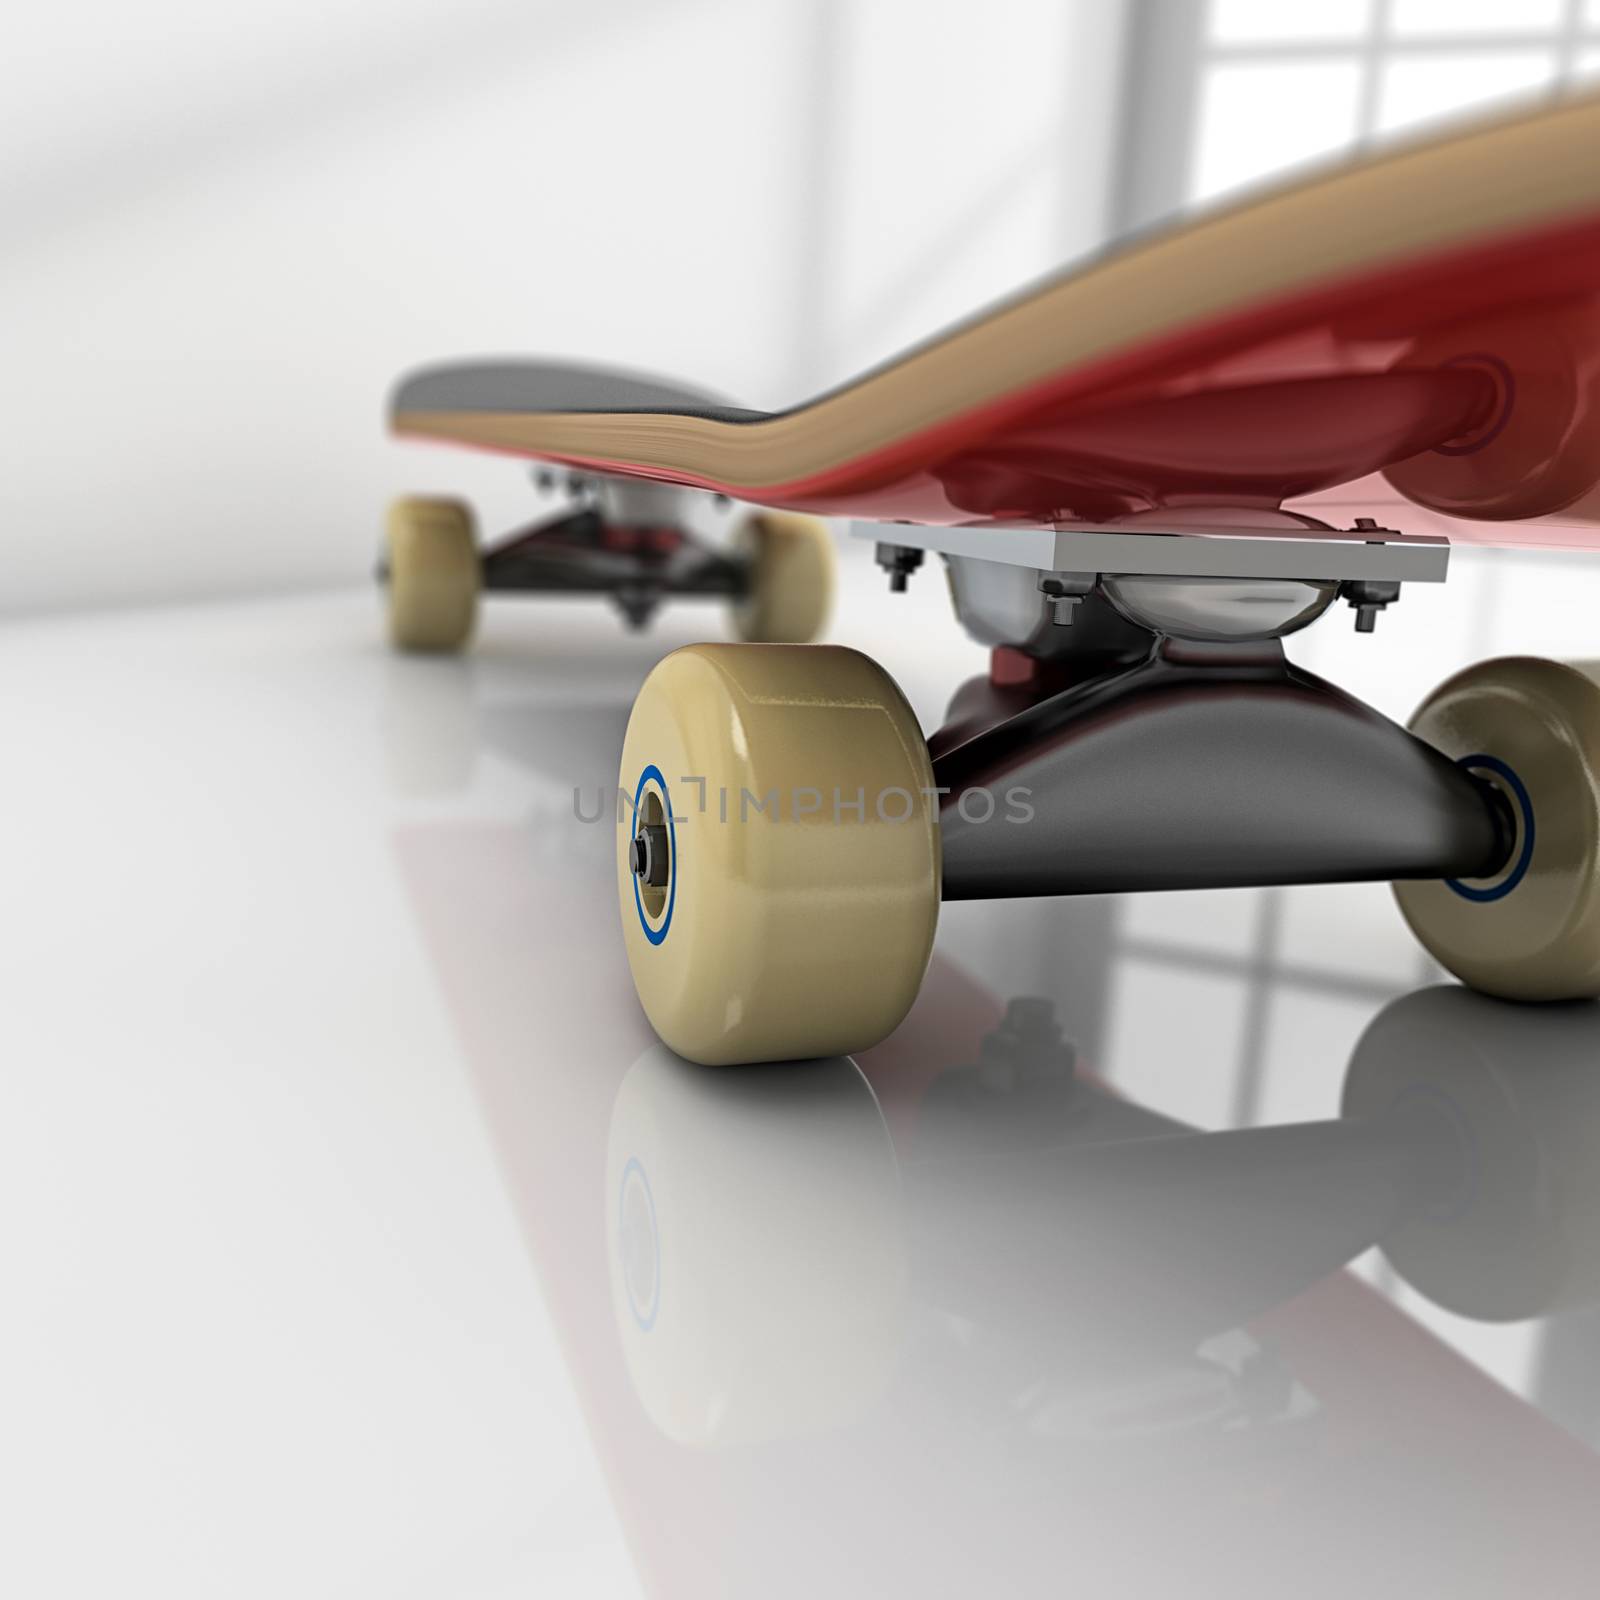 Skateboard on white room with glossy floor